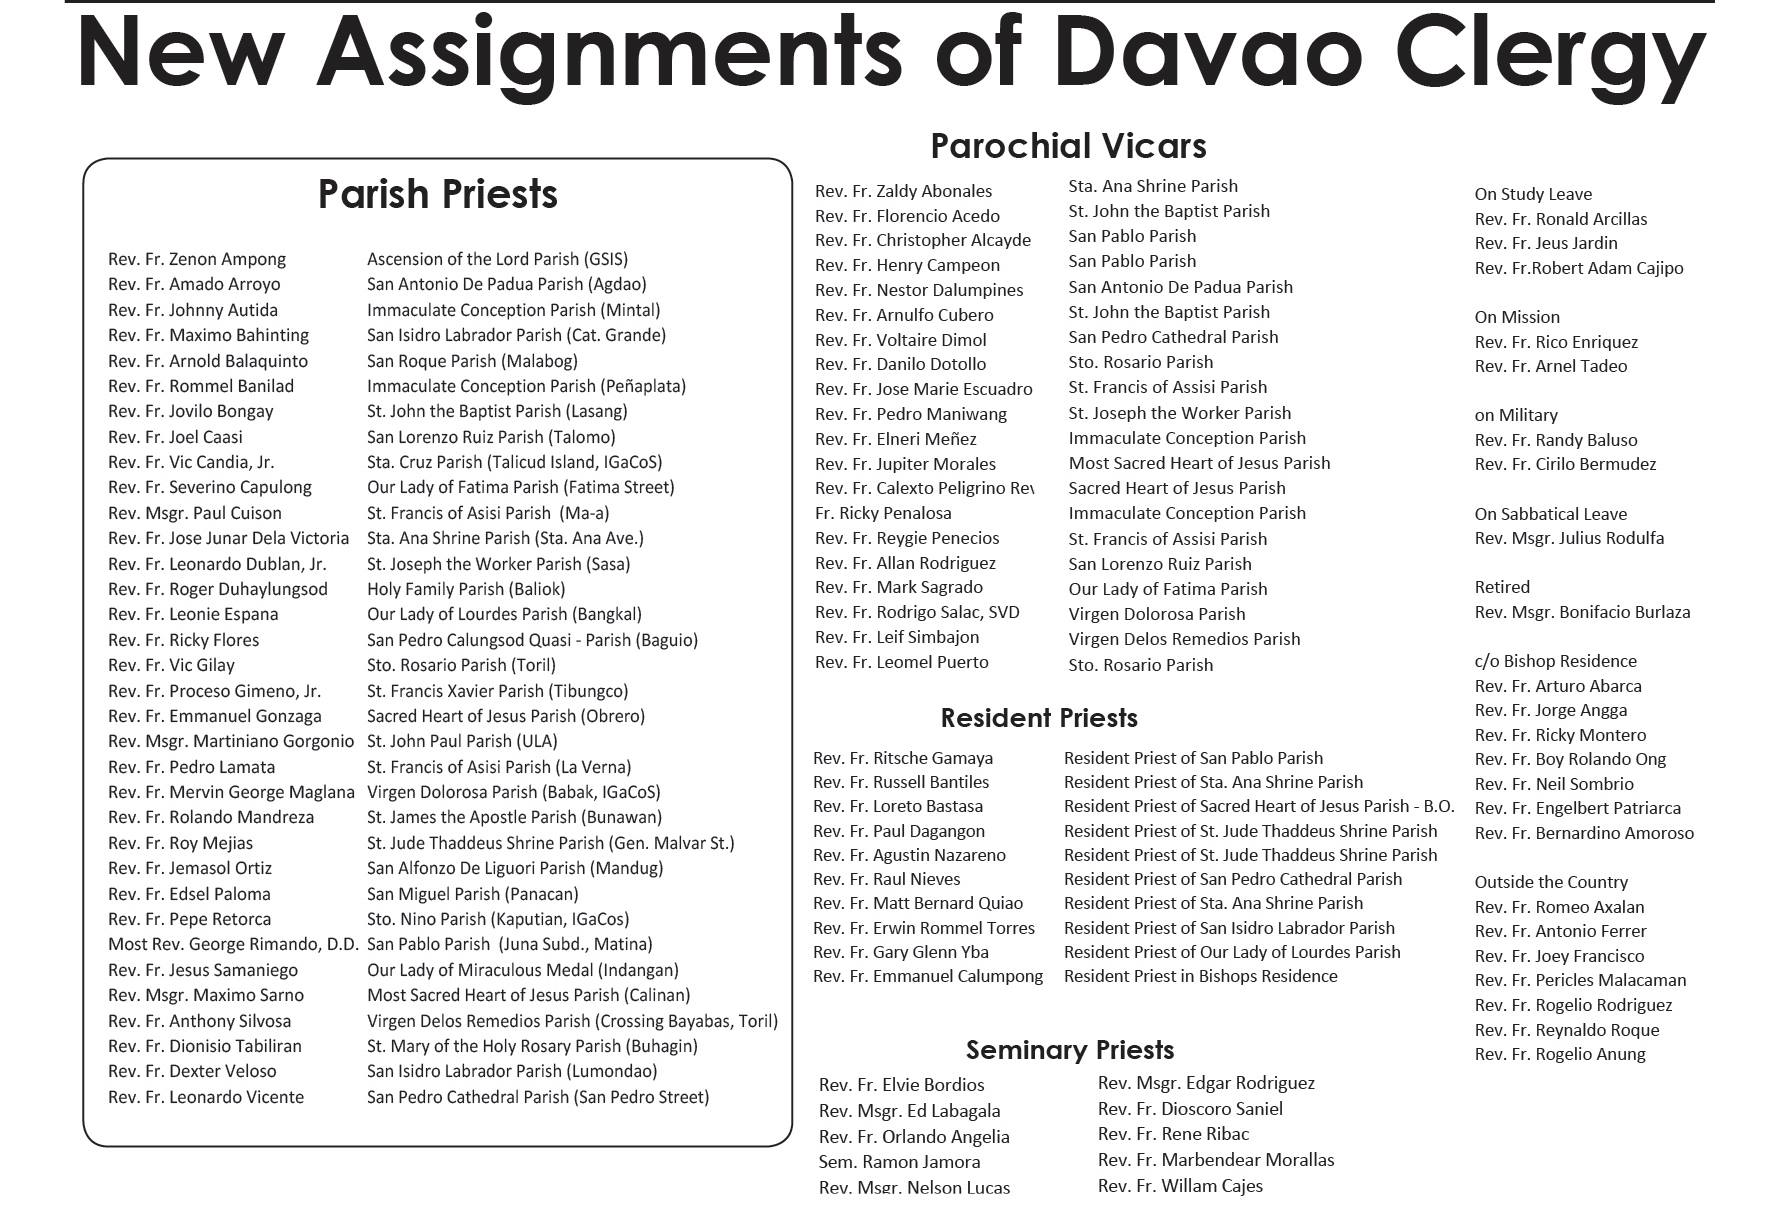 new assignments of Davao Clergy 2018